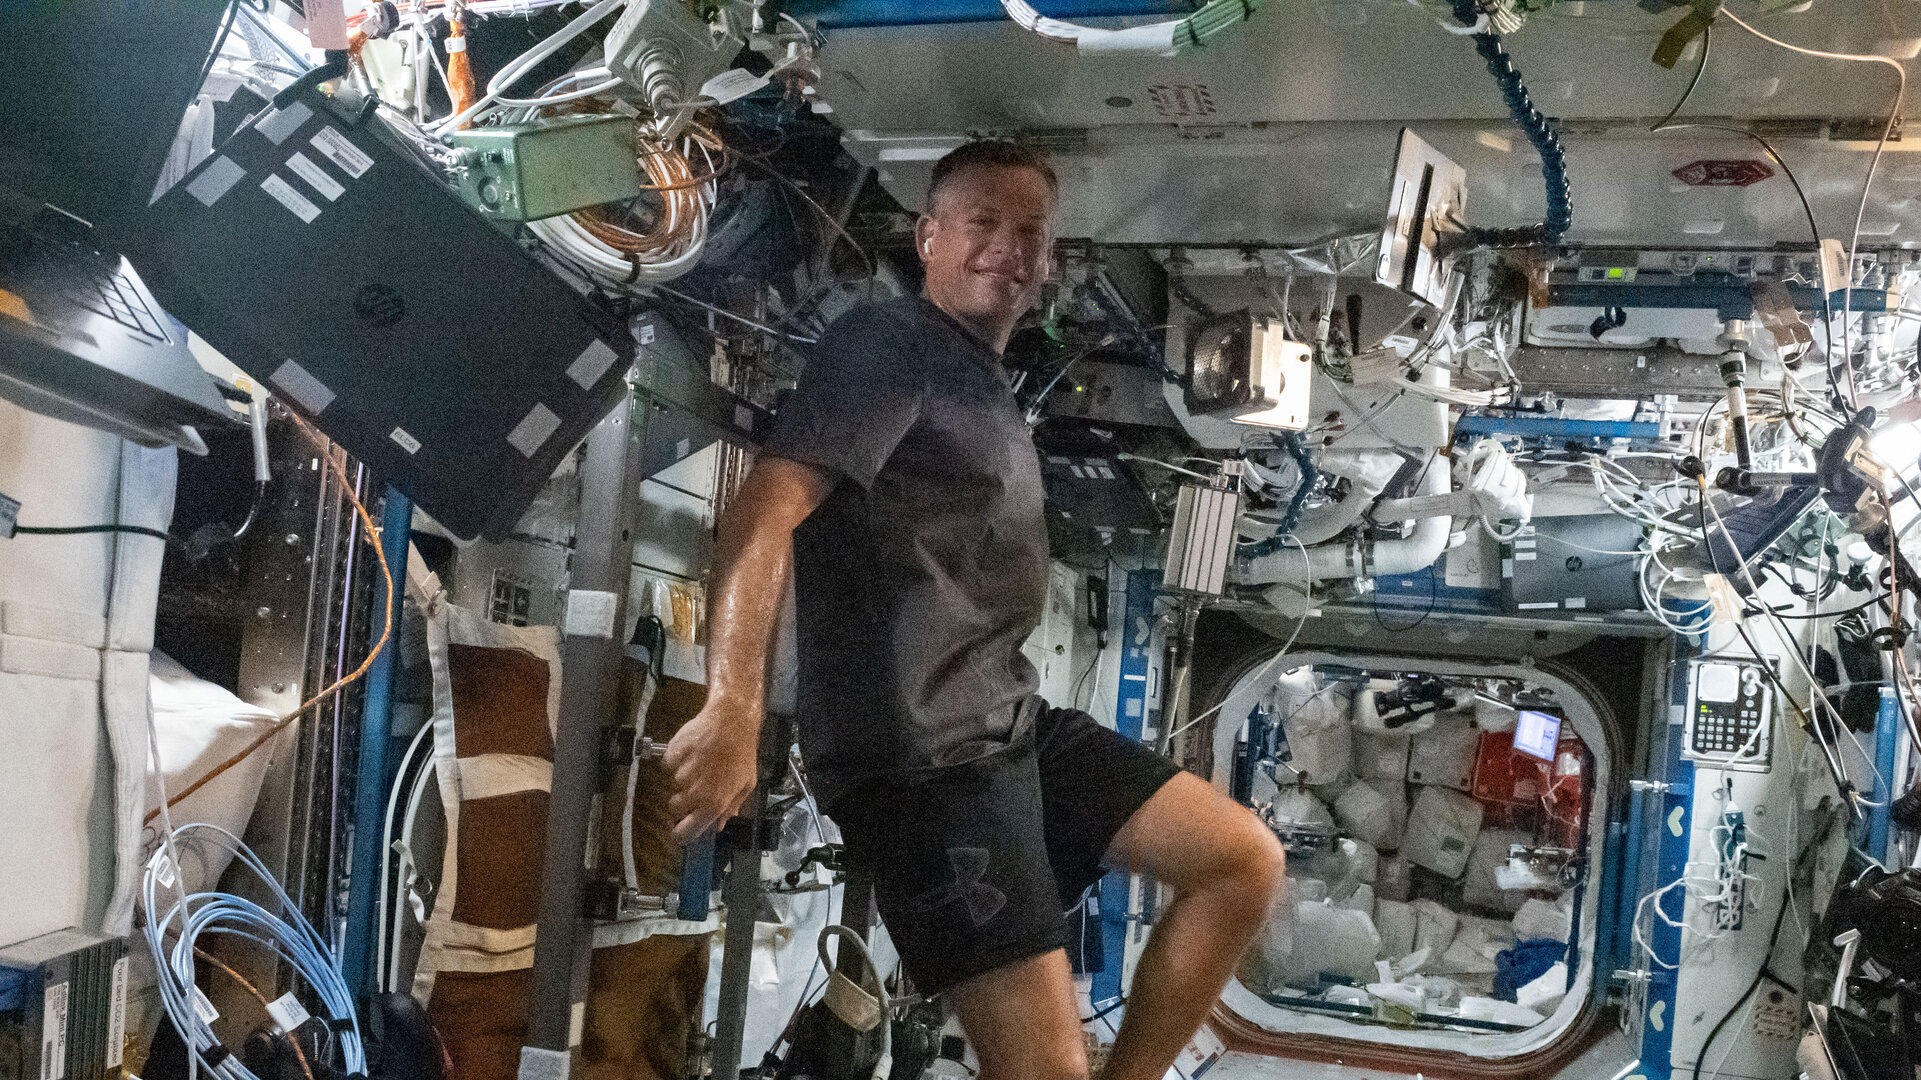 Andreas exercising on the Space Station bike